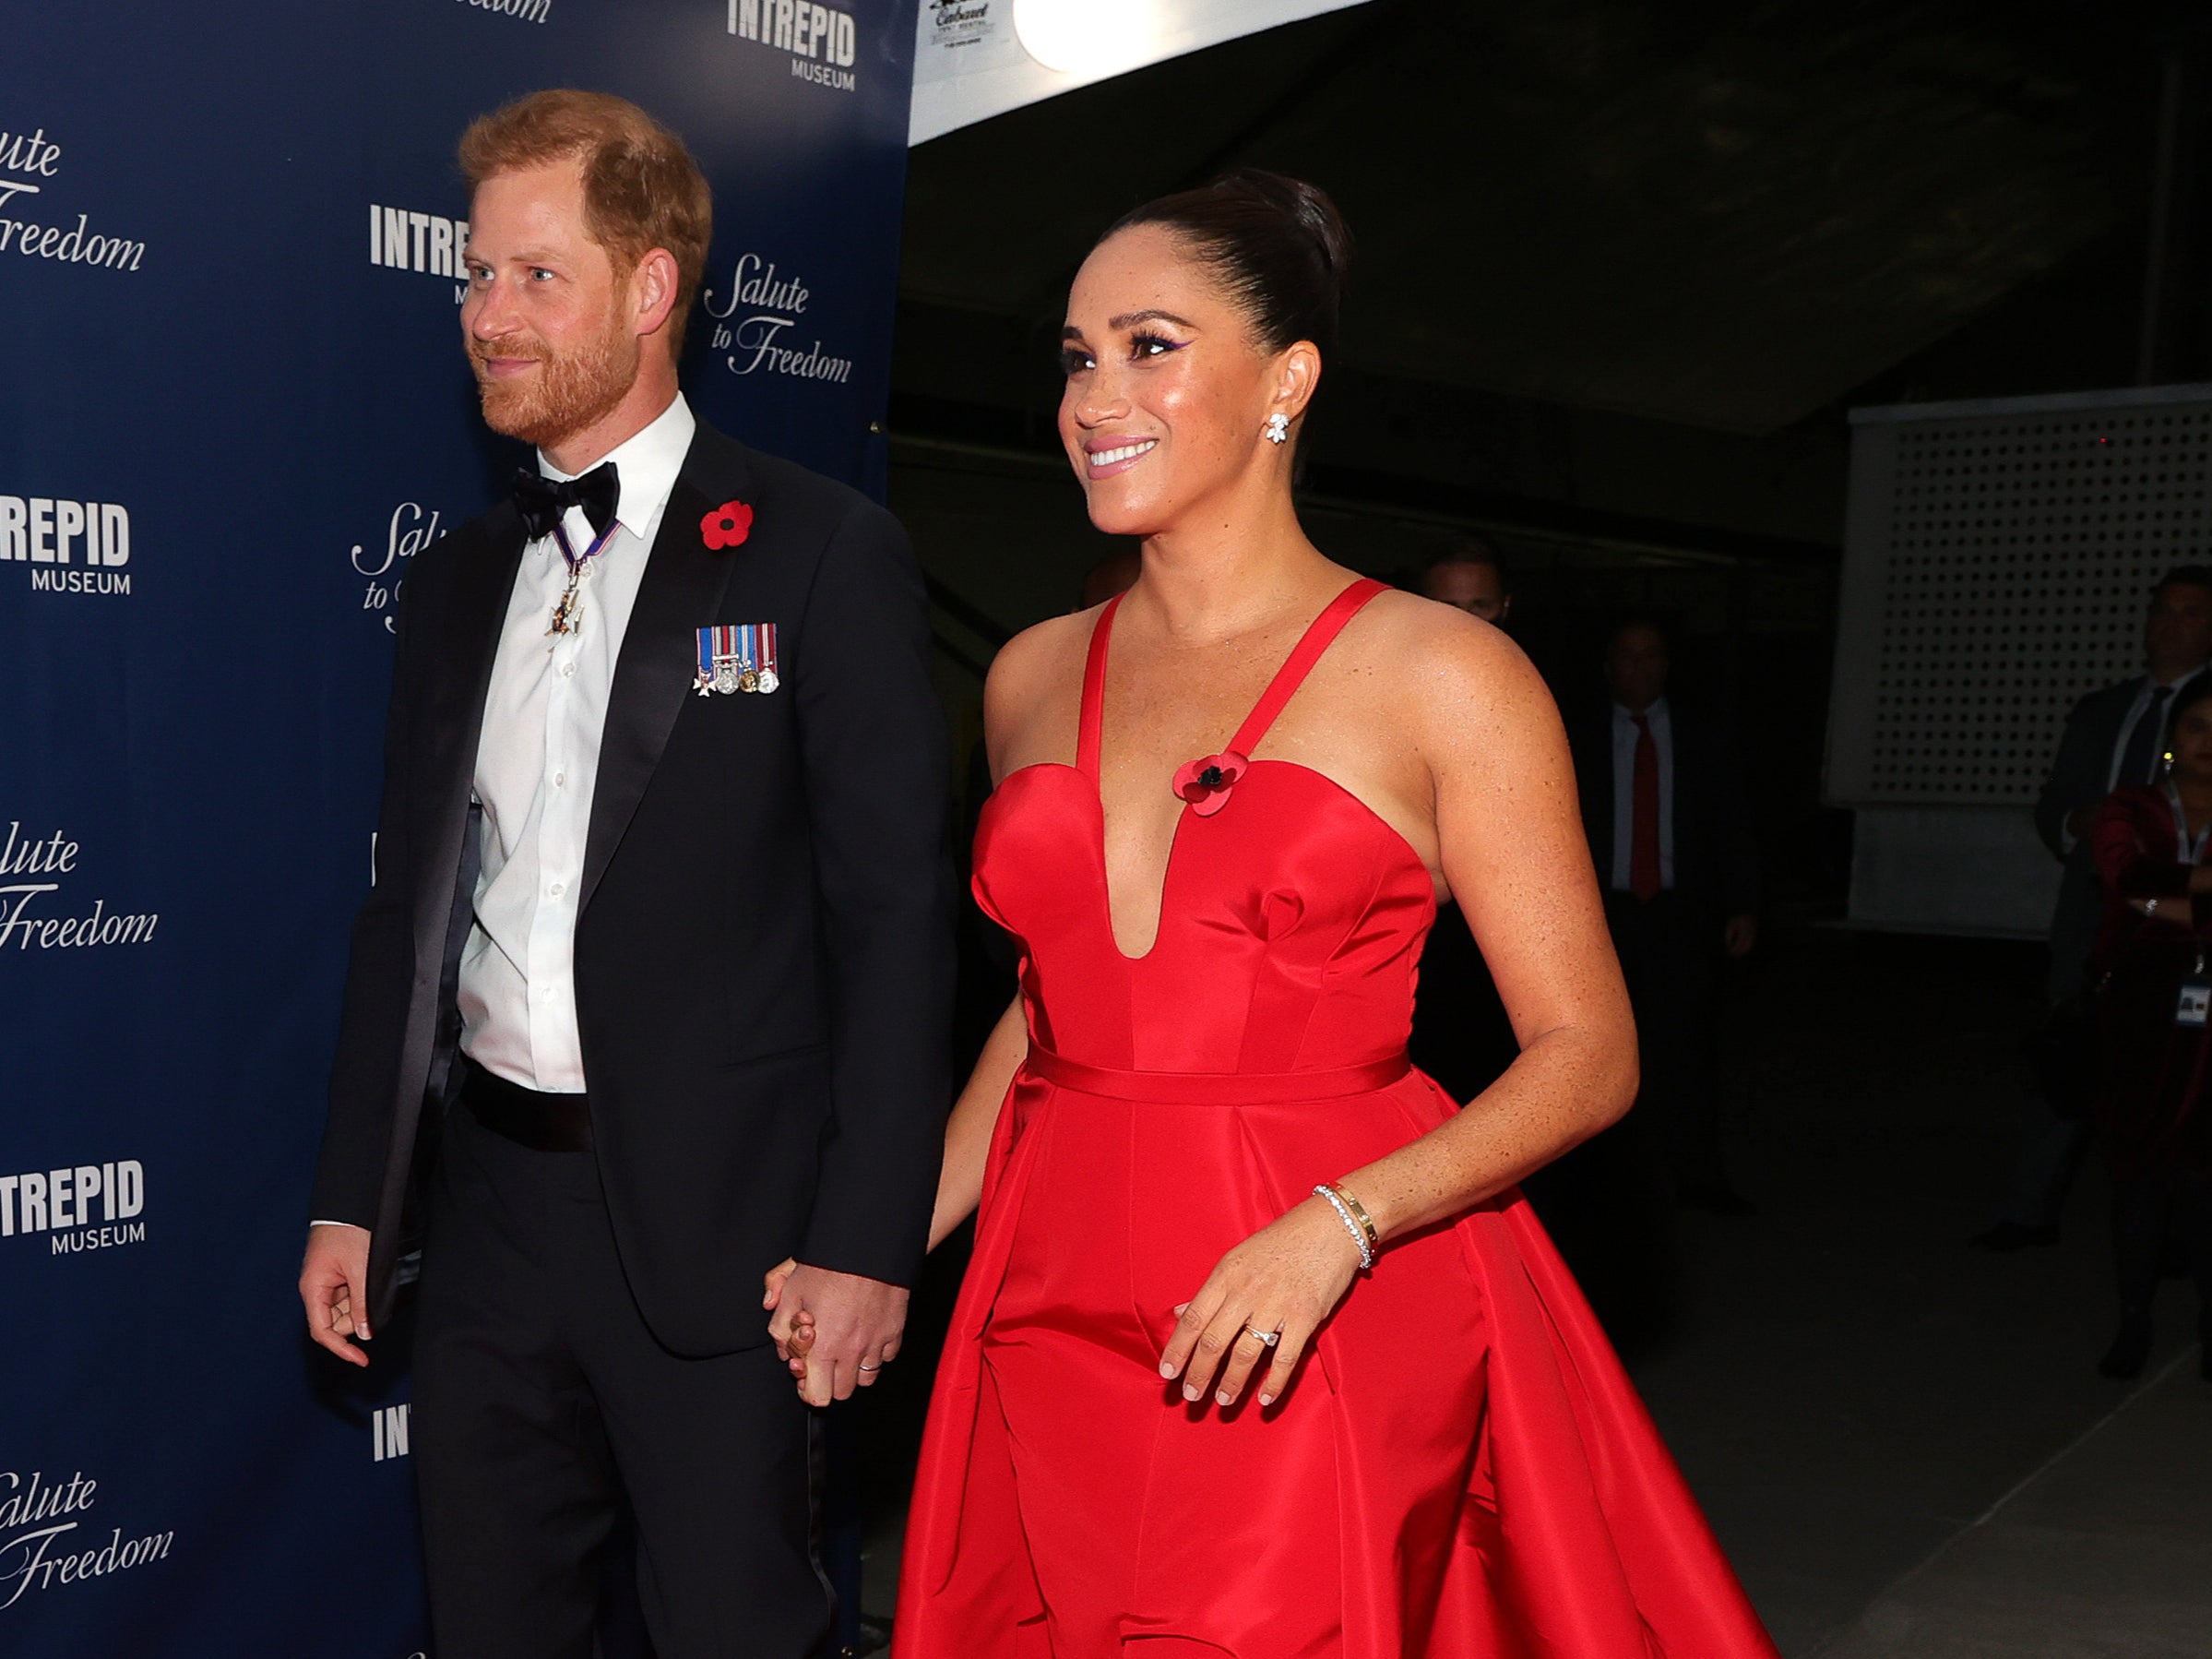 Meghan Markle and Prince Harry attend Salute to Freedom Gala in New York City